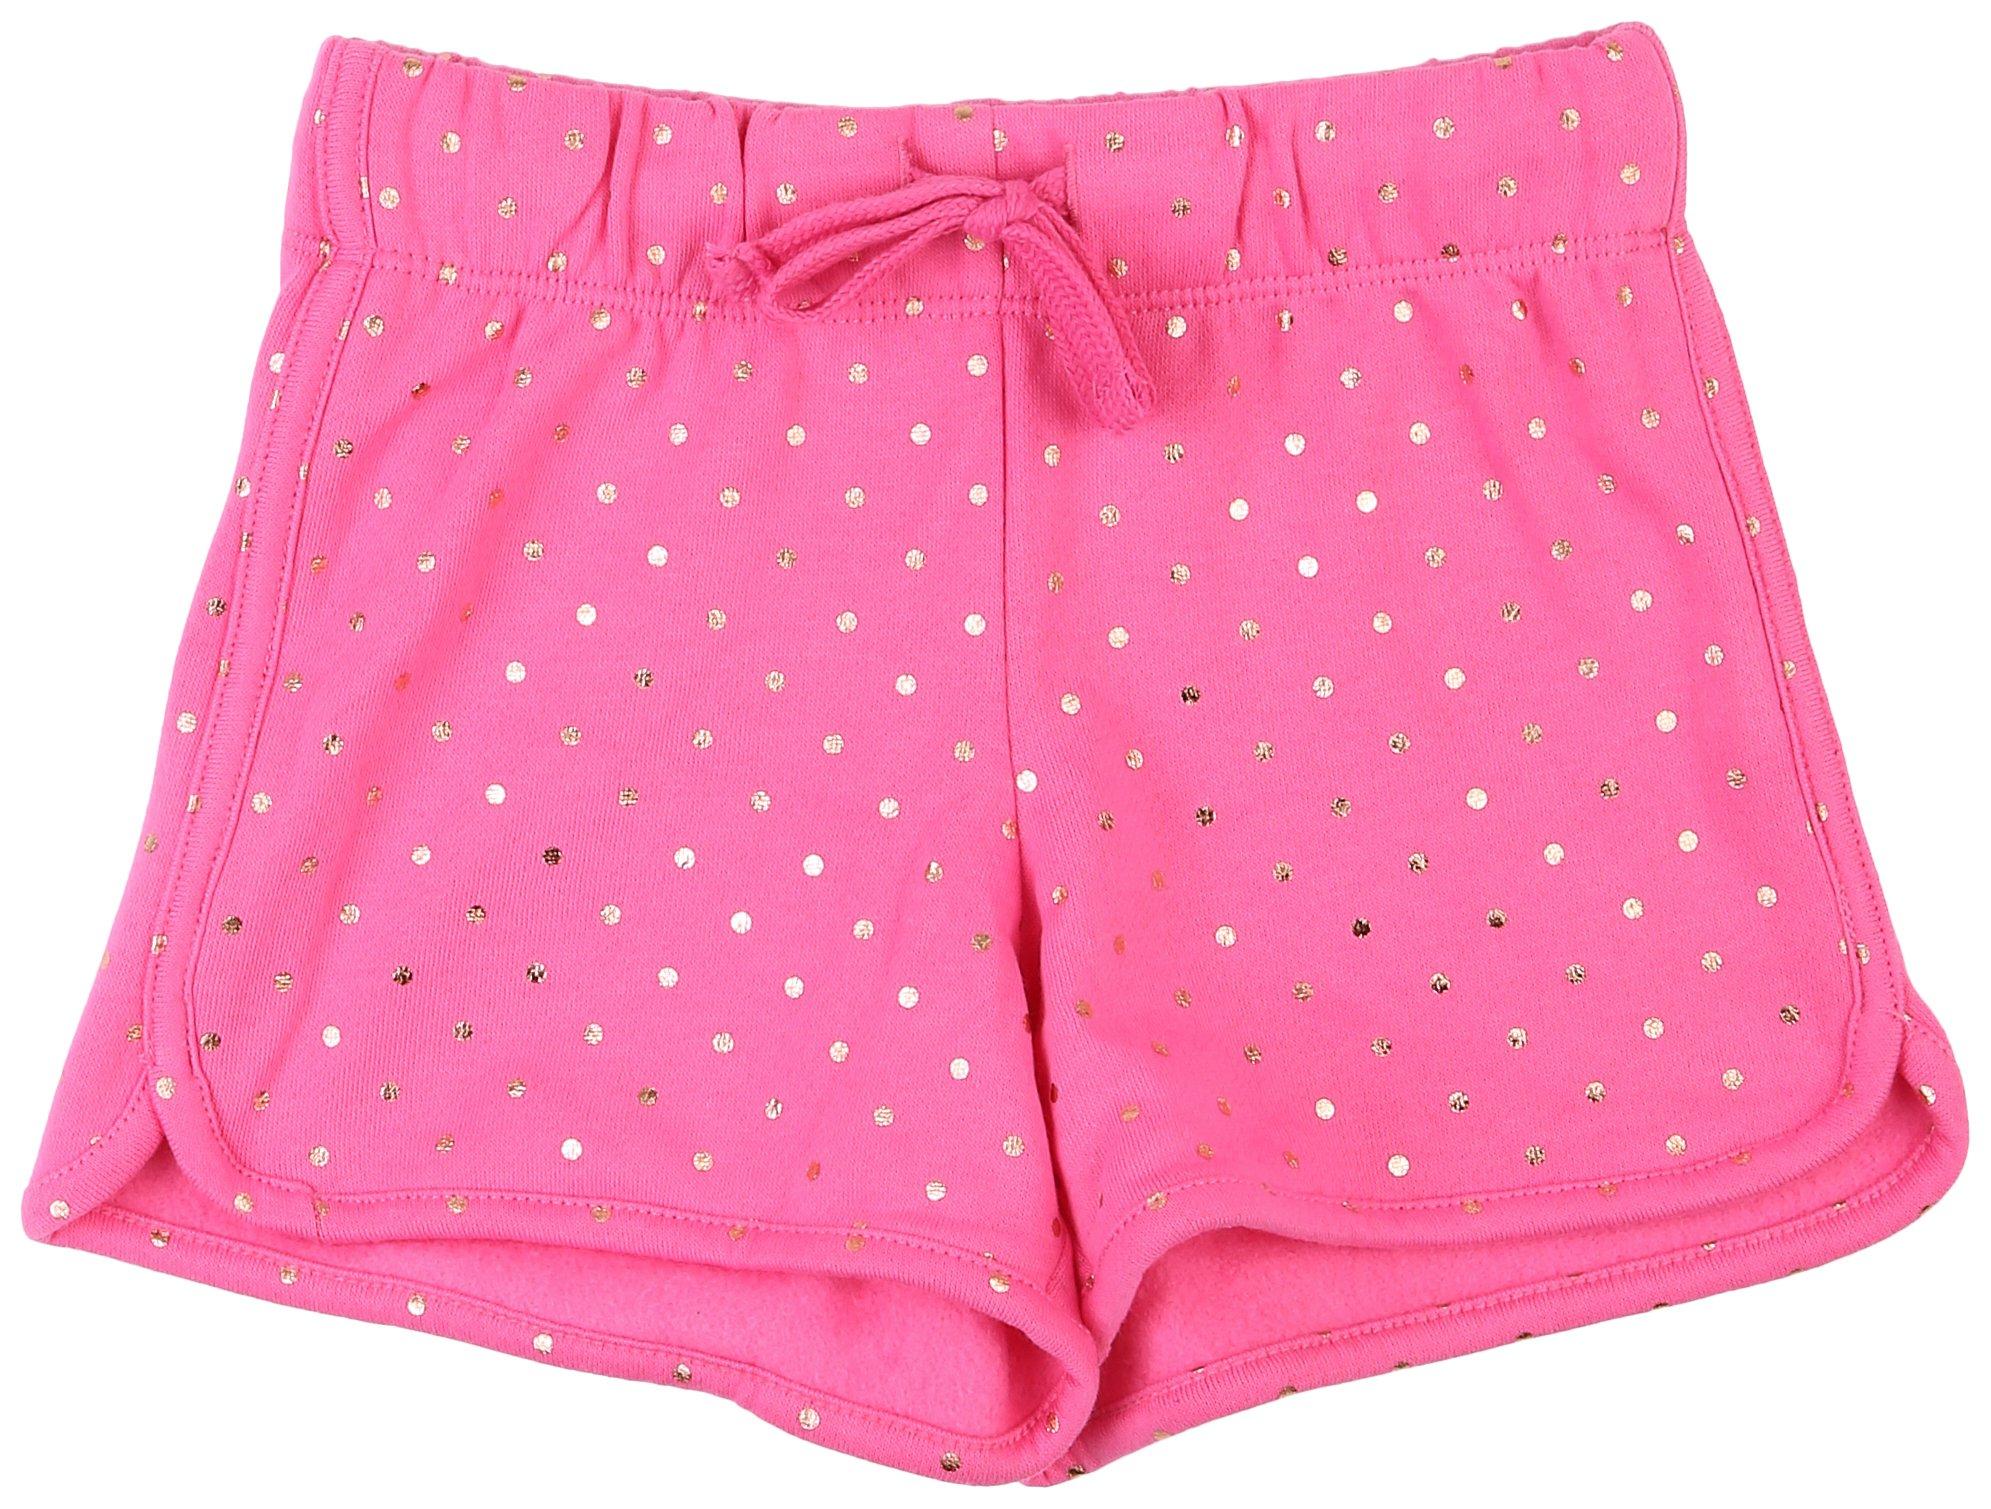 Little Girls Drawstring French Terry Shorts